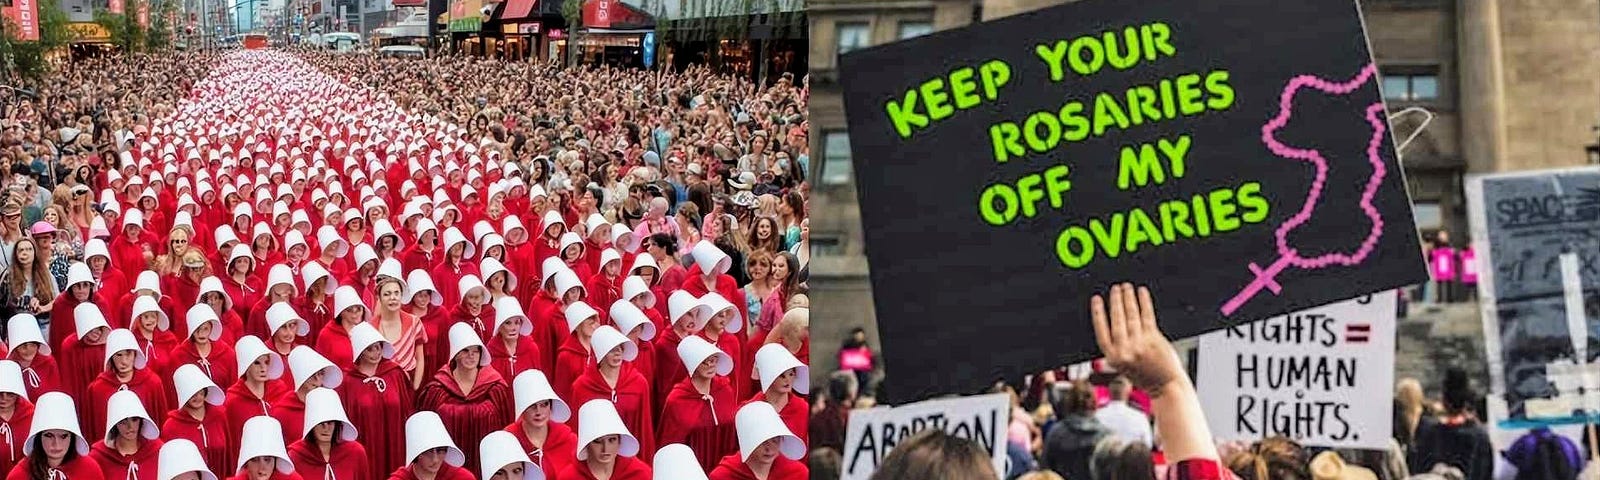 women protesting reproductive rights